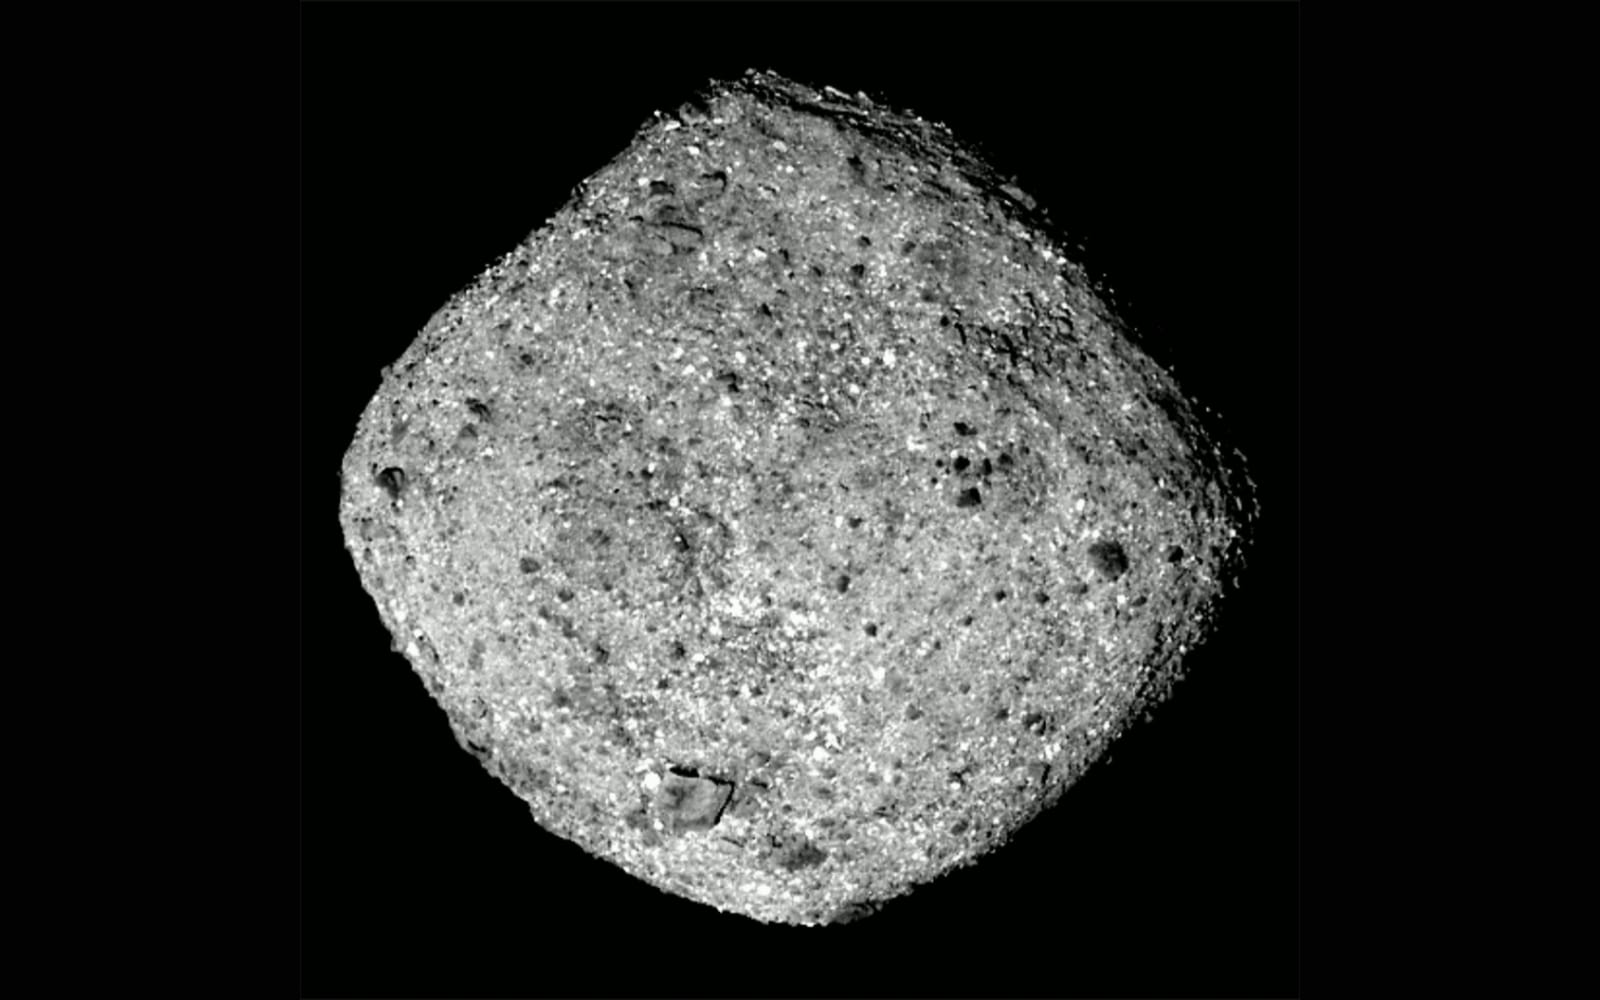 Asteroid Bennu surface rocky according to the new NASA report